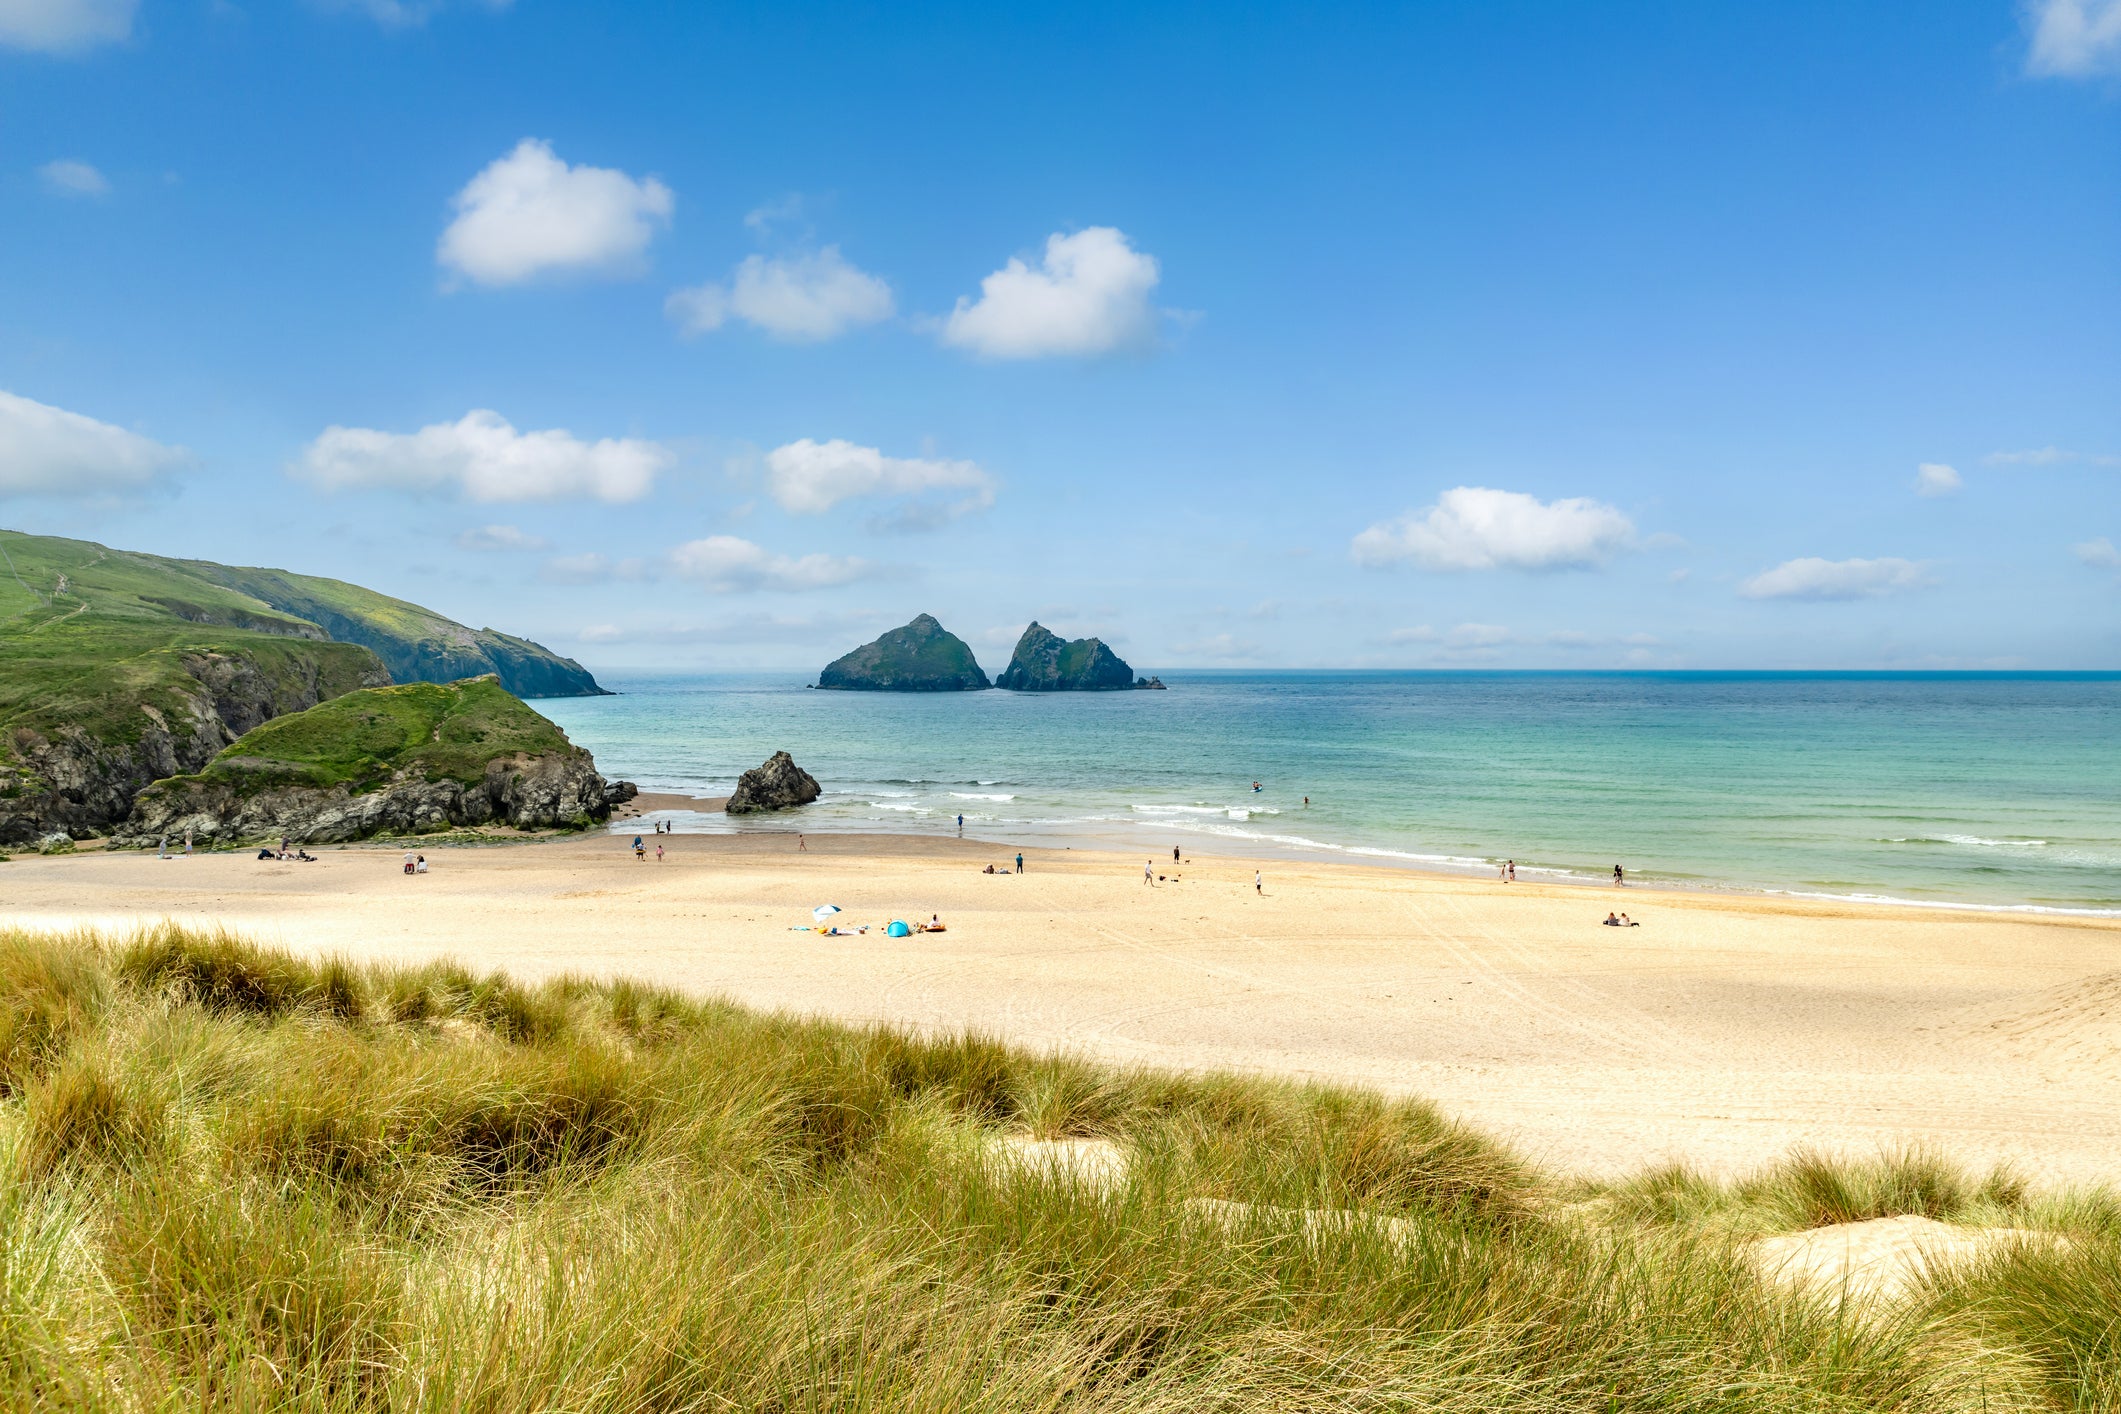 Poldark and James Bond have also pitched up cameras on Holywell Bay